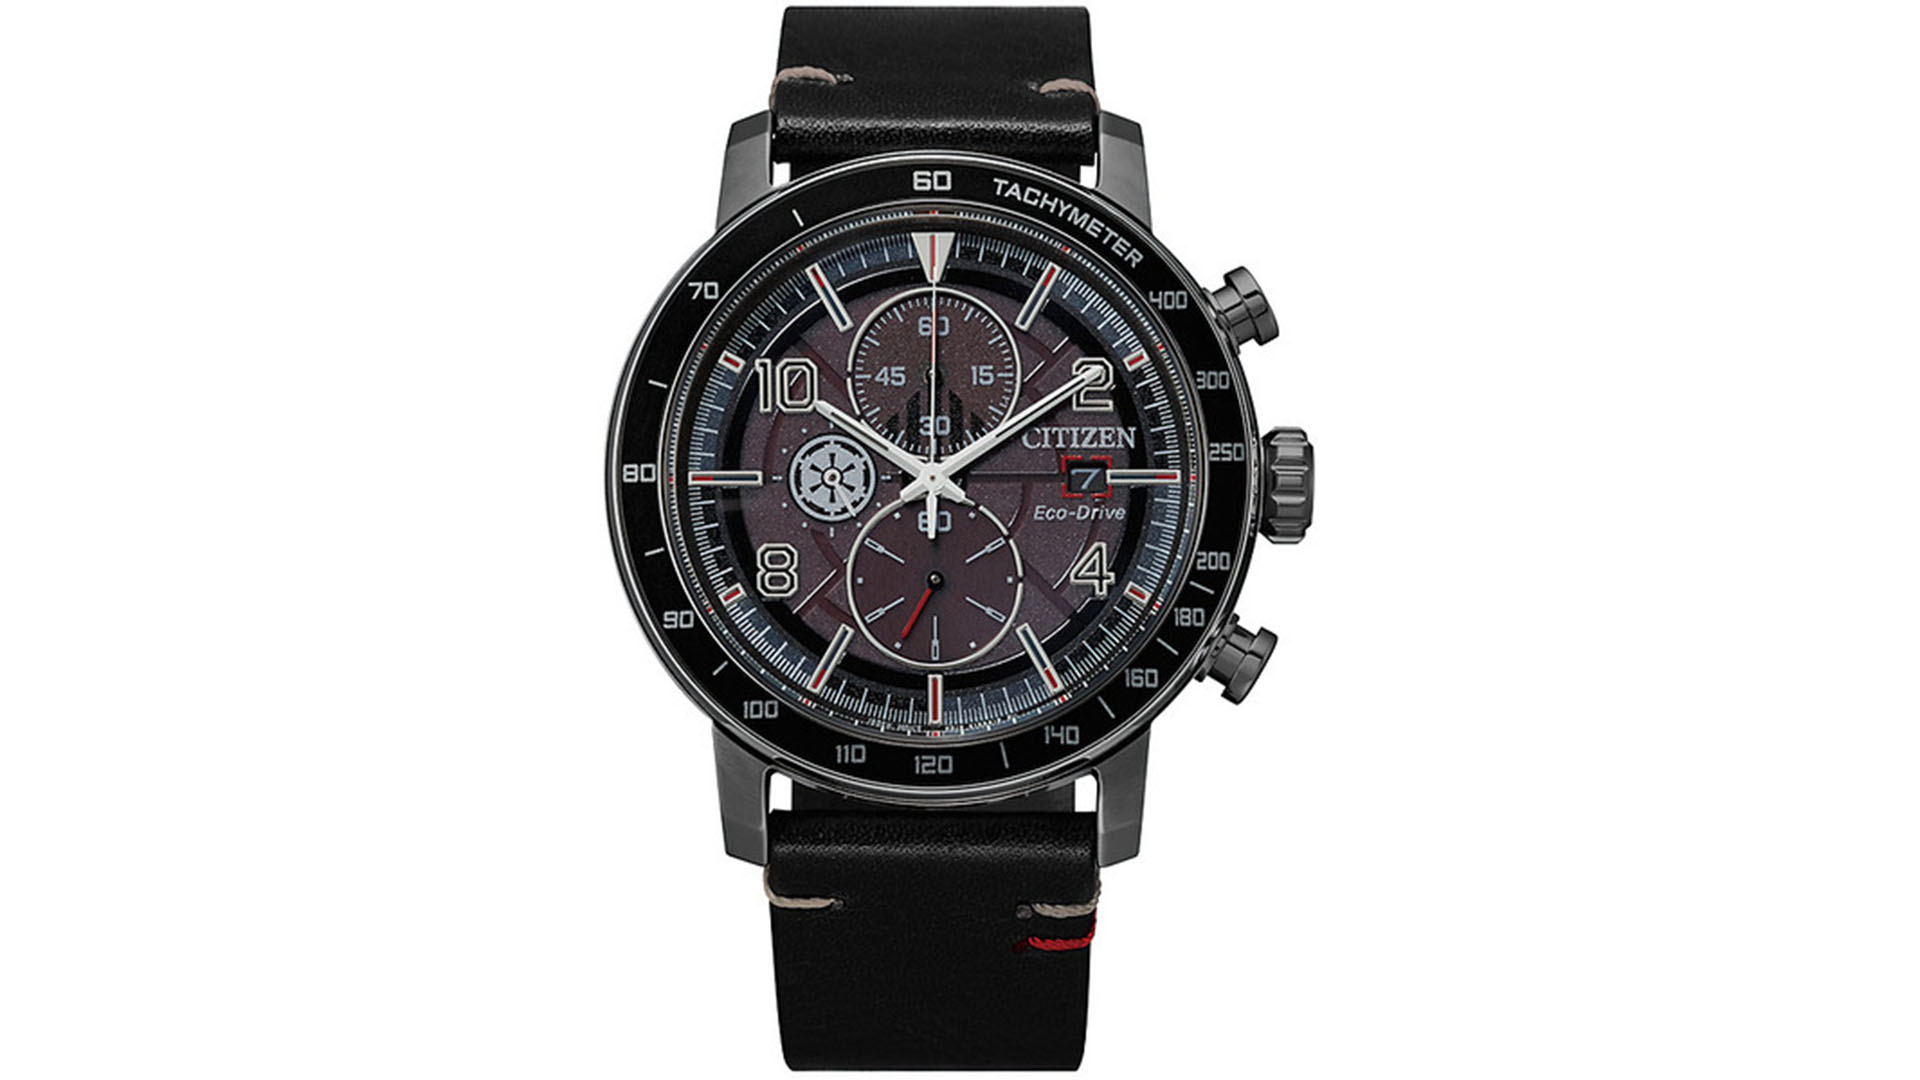 A black Empire-themed Citizen watch inspired by Star Wars